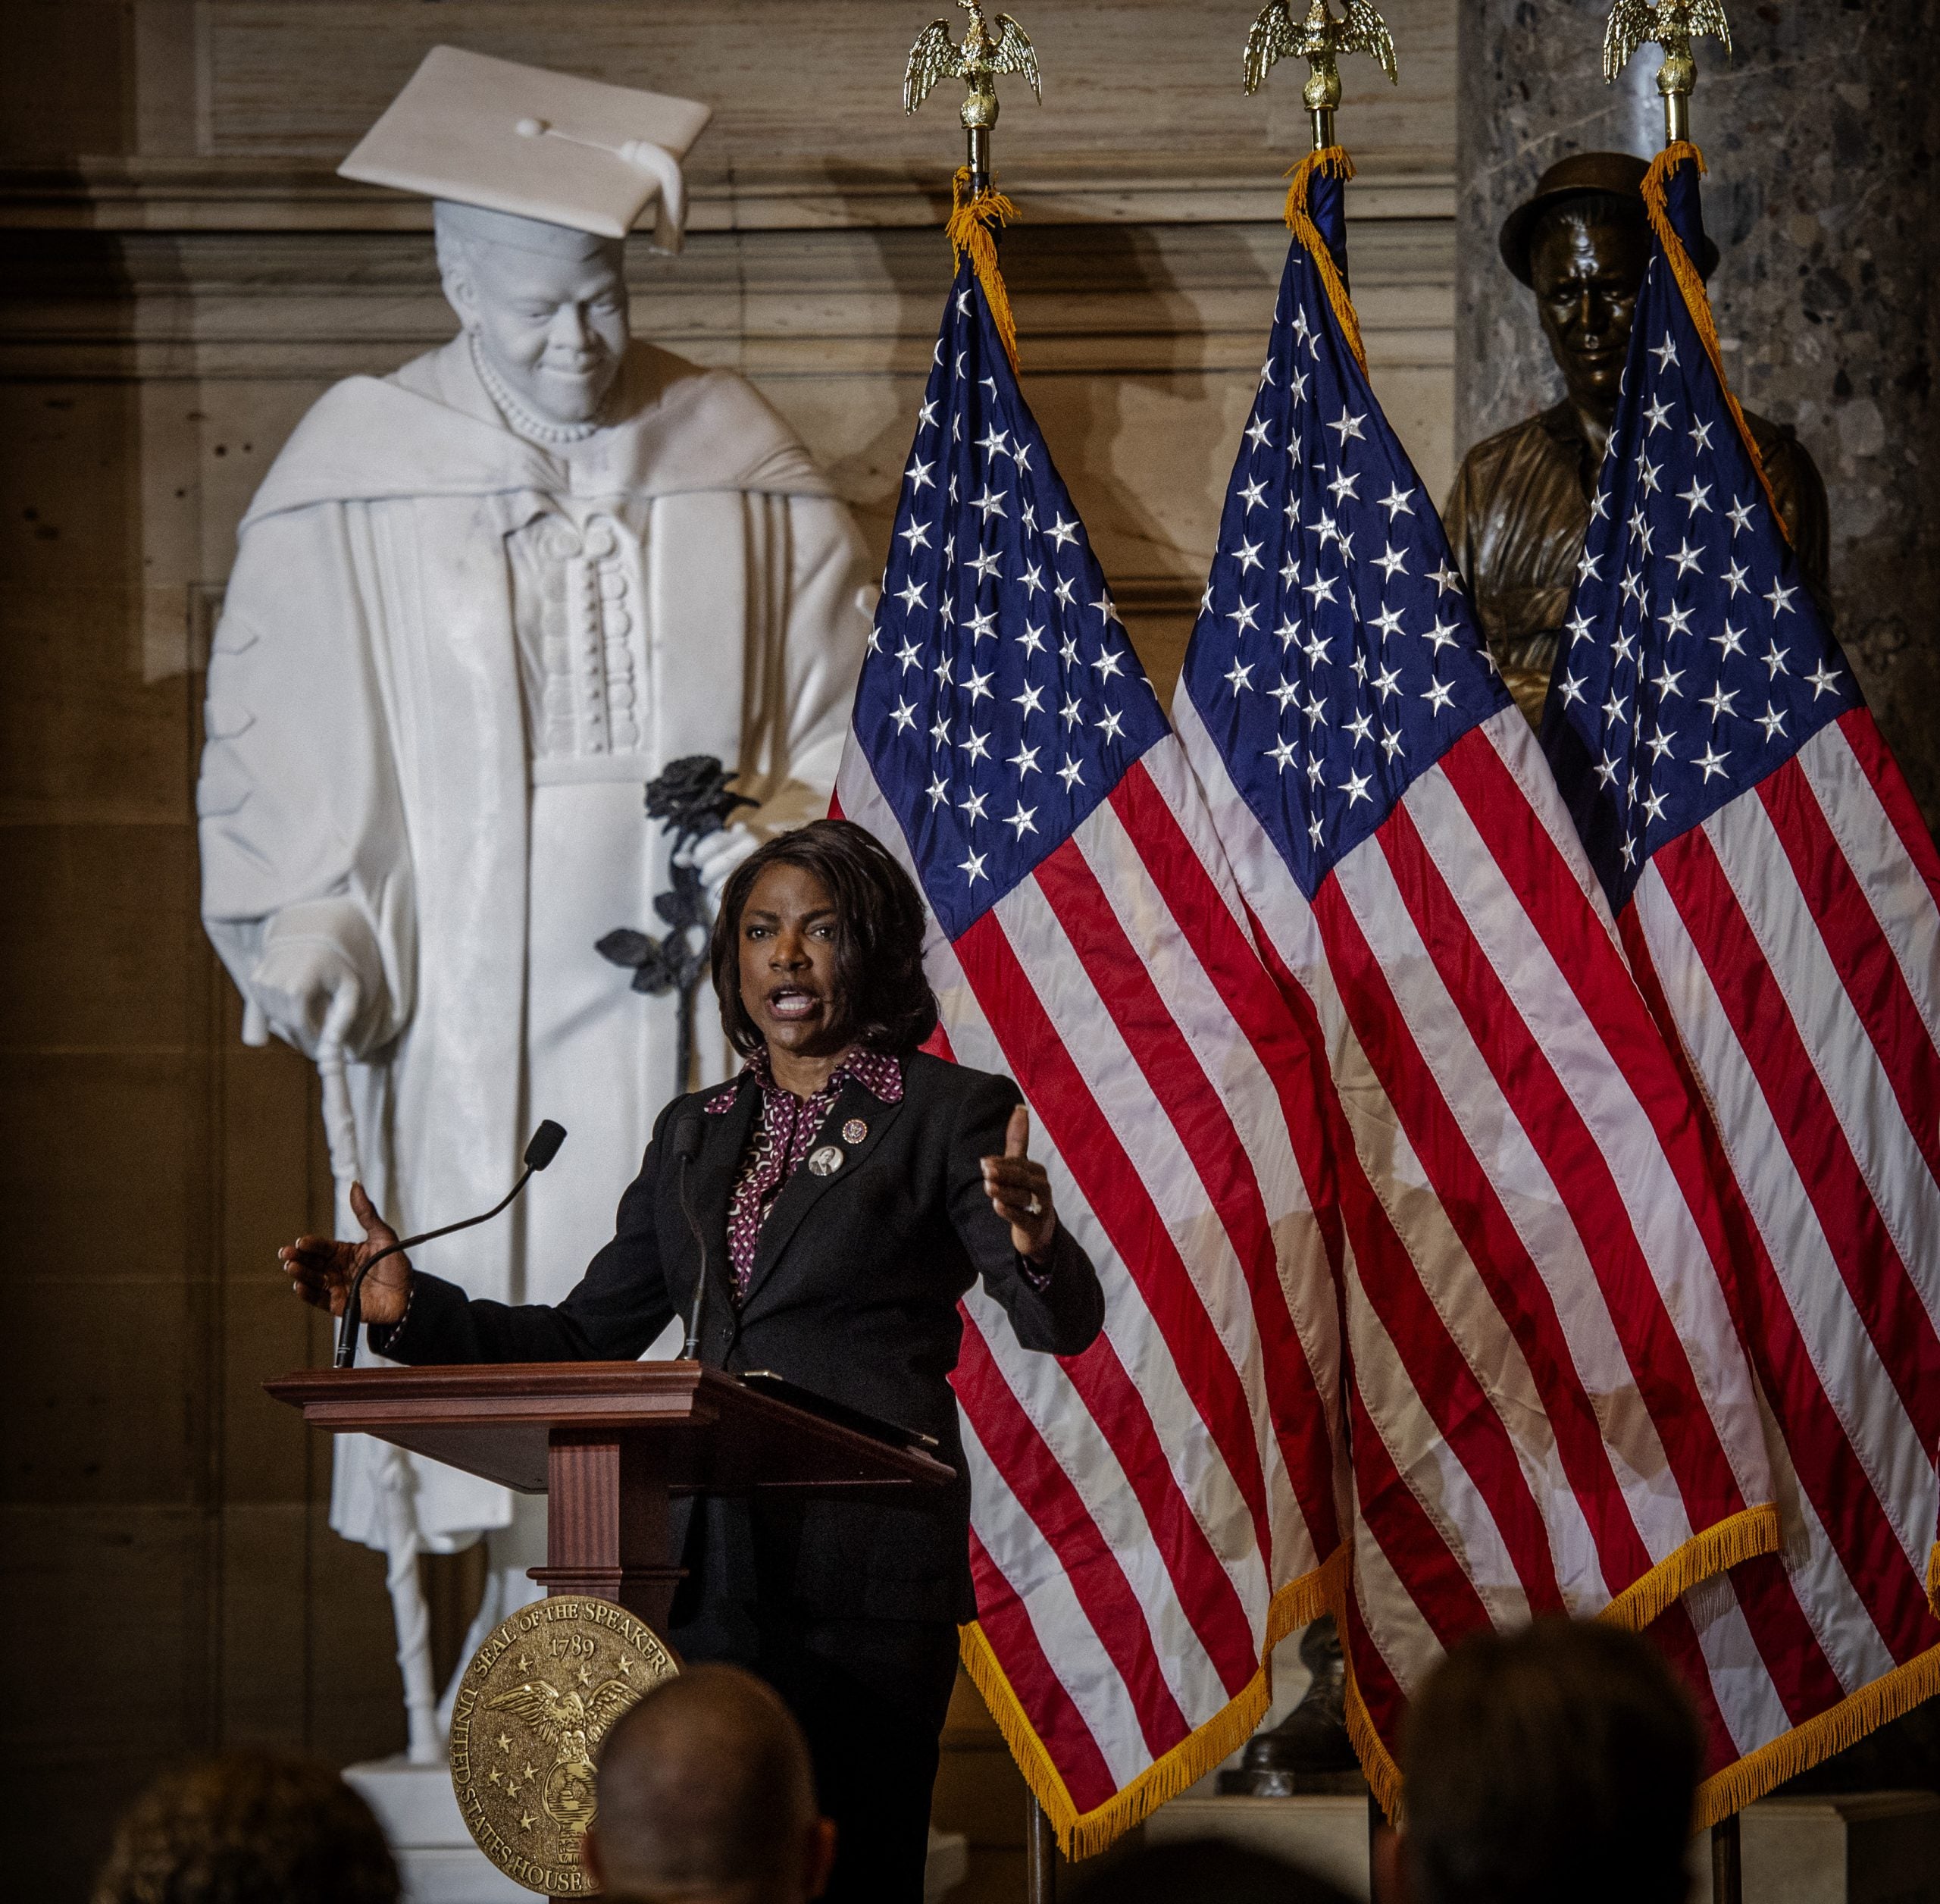 Statue Honoring Civil Rights Leader Mary McLeod Bethune Unveiled In U.S. Capitol